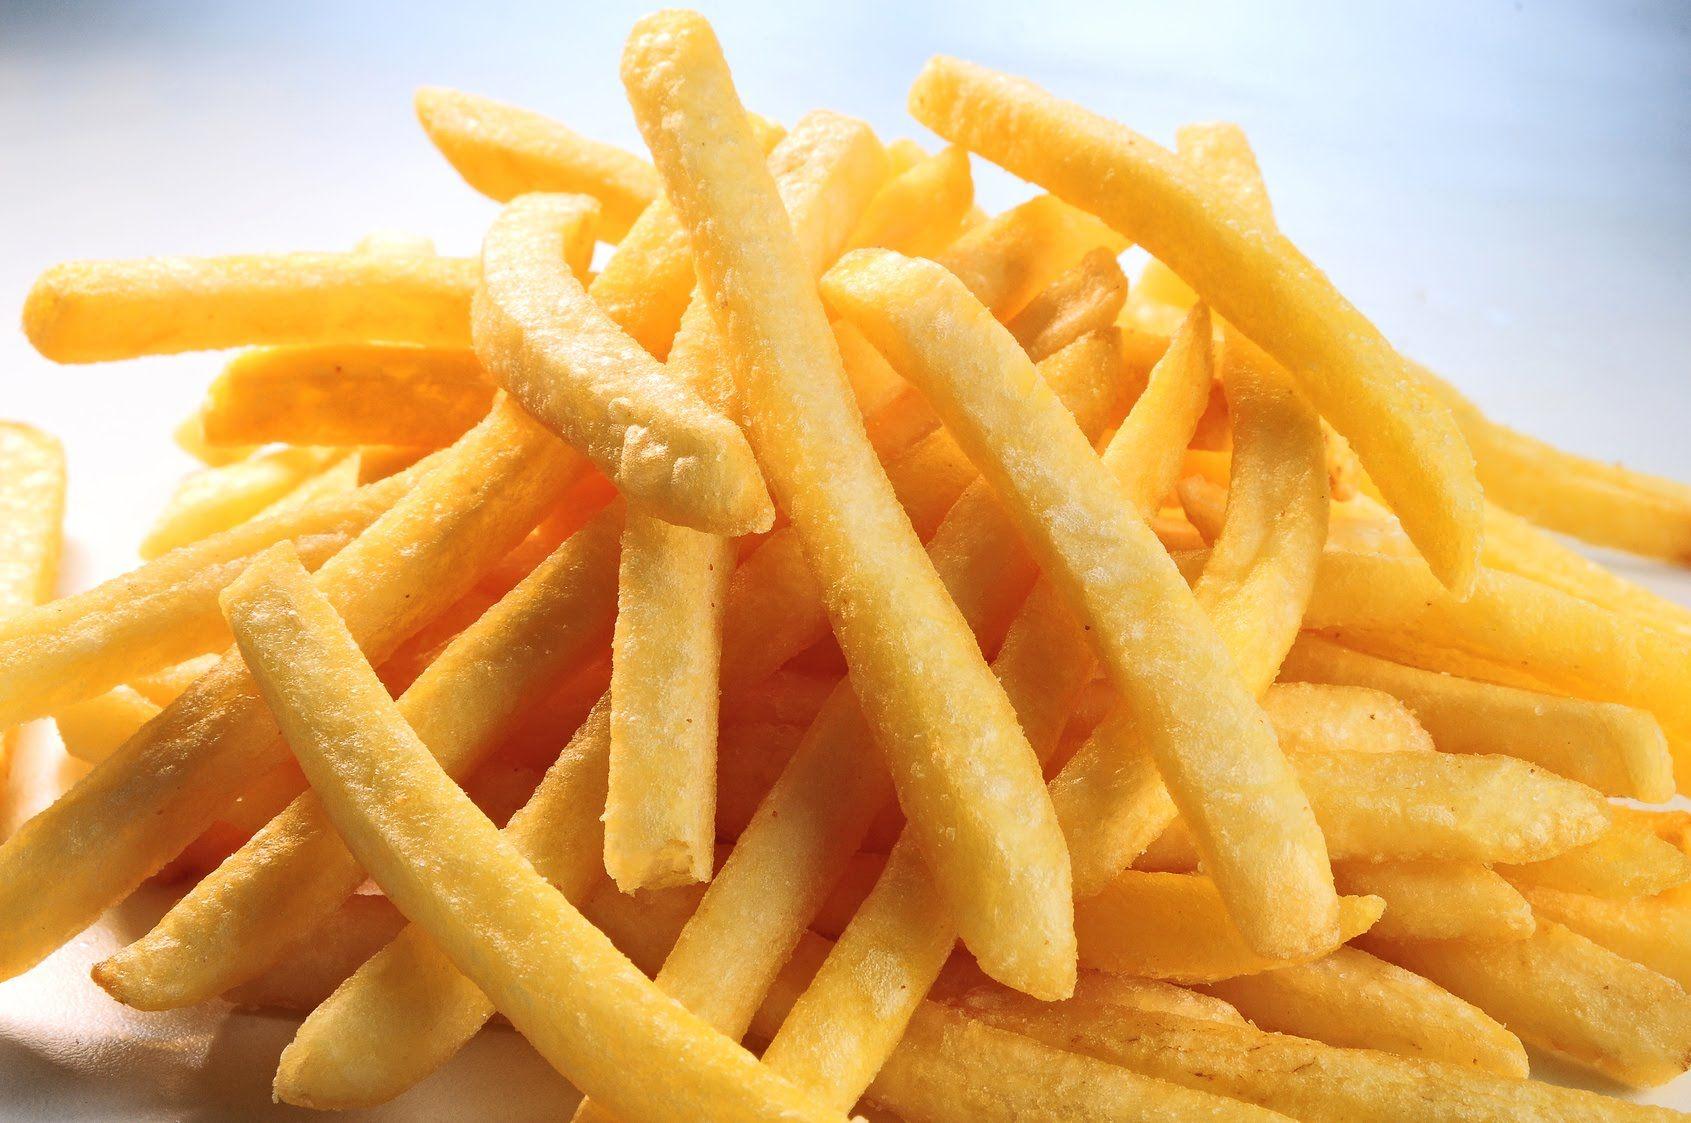 Wallpaper Of The Day: McDonald's French Friesx1123